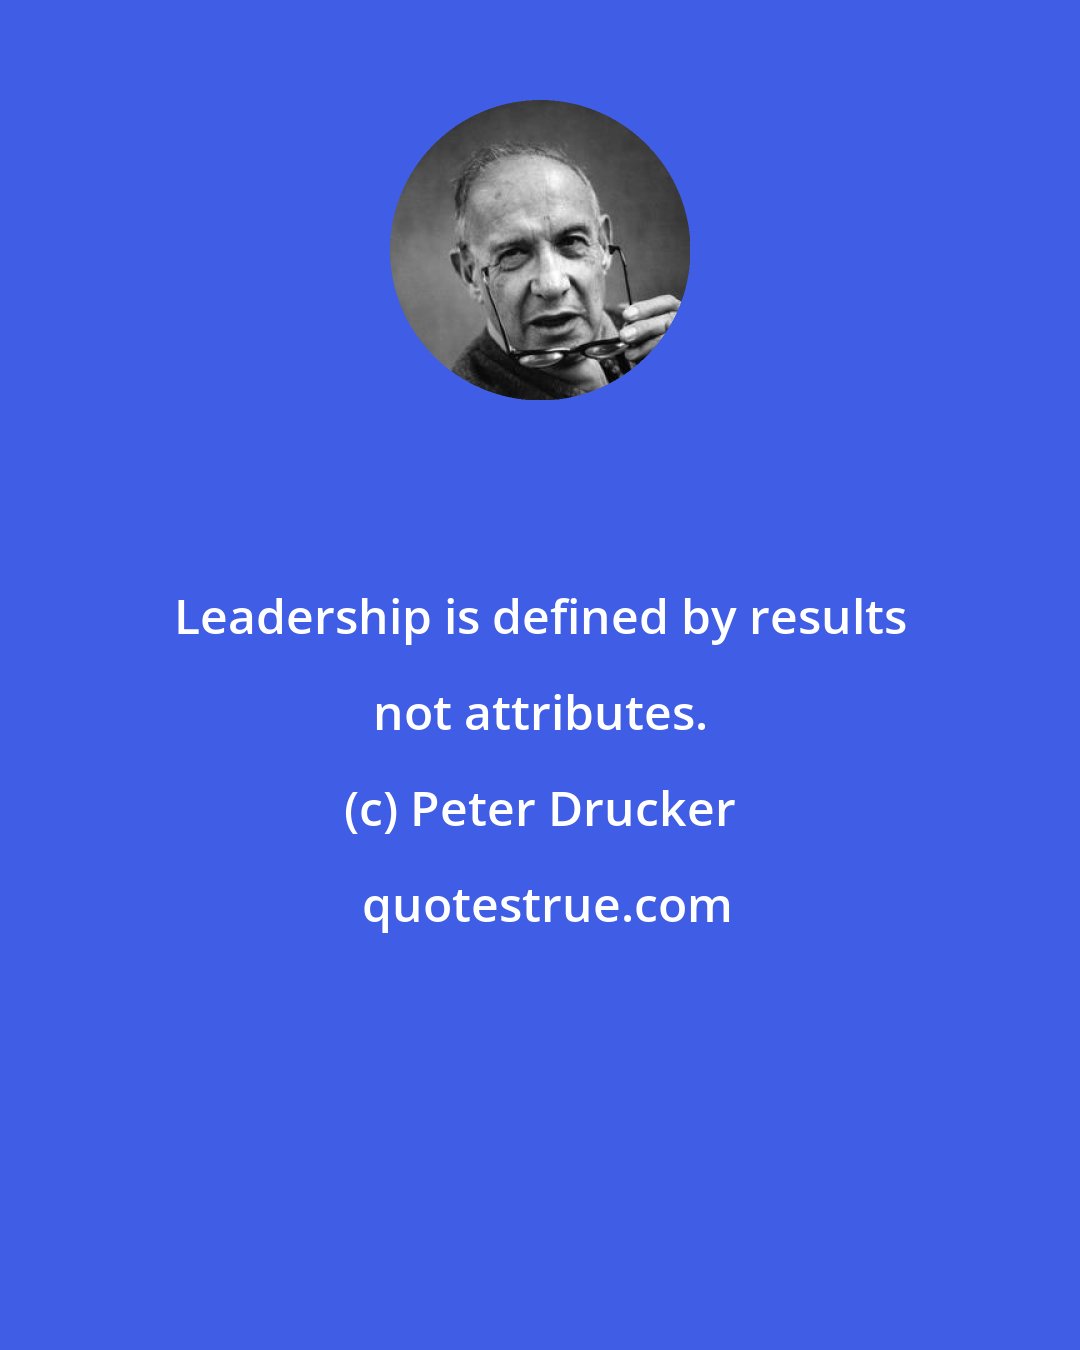 Peter Drucker: Leadership is defined by results not attributes.